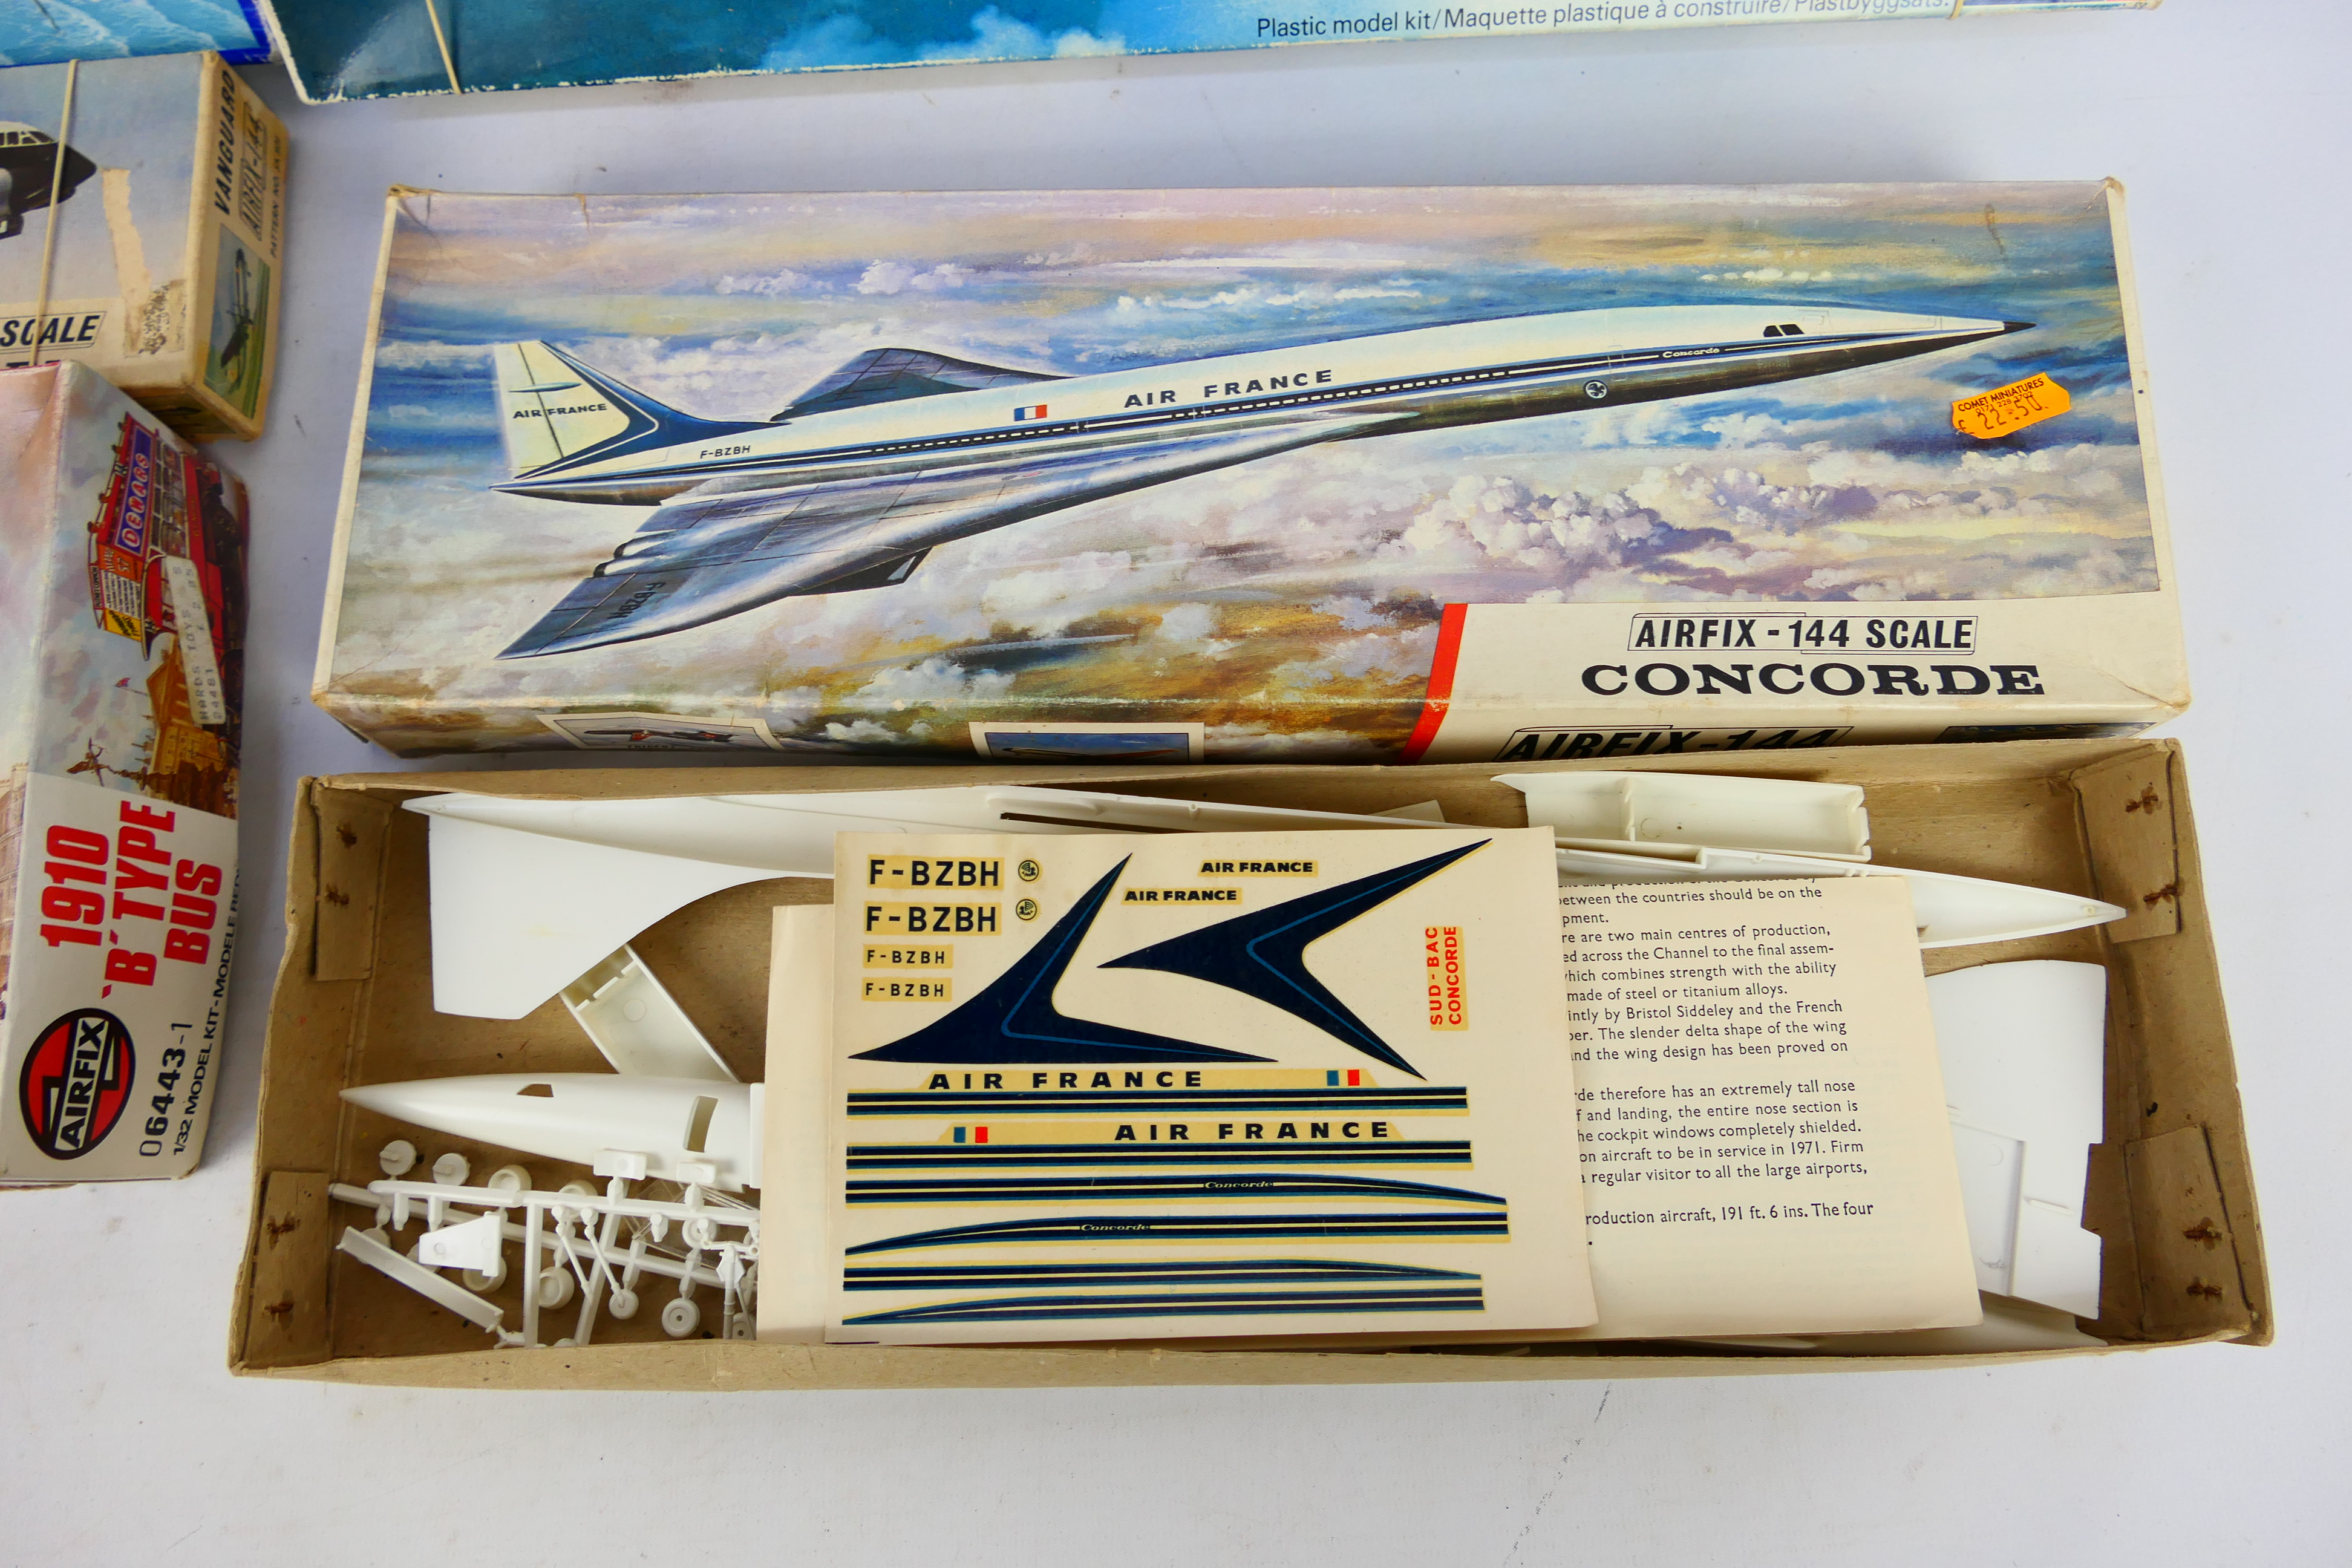 Airfix - Revell - 5 x boxed model kits including Laker DC10 Skytrain in 1:144 scale, - Image 4 of 4